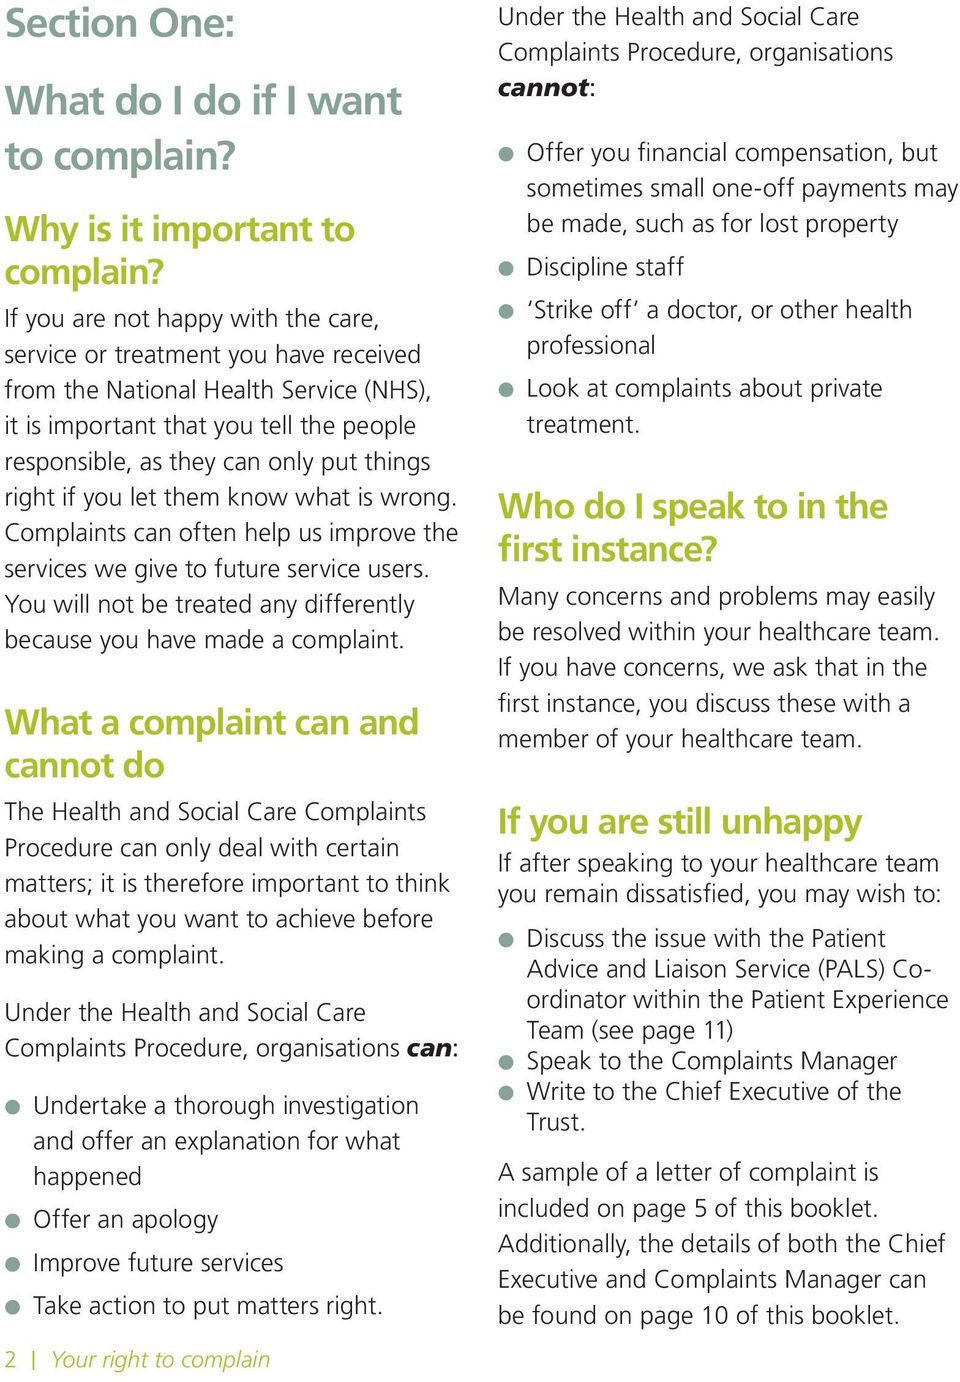 right if you let them know what is wrong. Complaints can often help us improve the services we give to future service users. You will not be treated any differently because you have made a complaint.